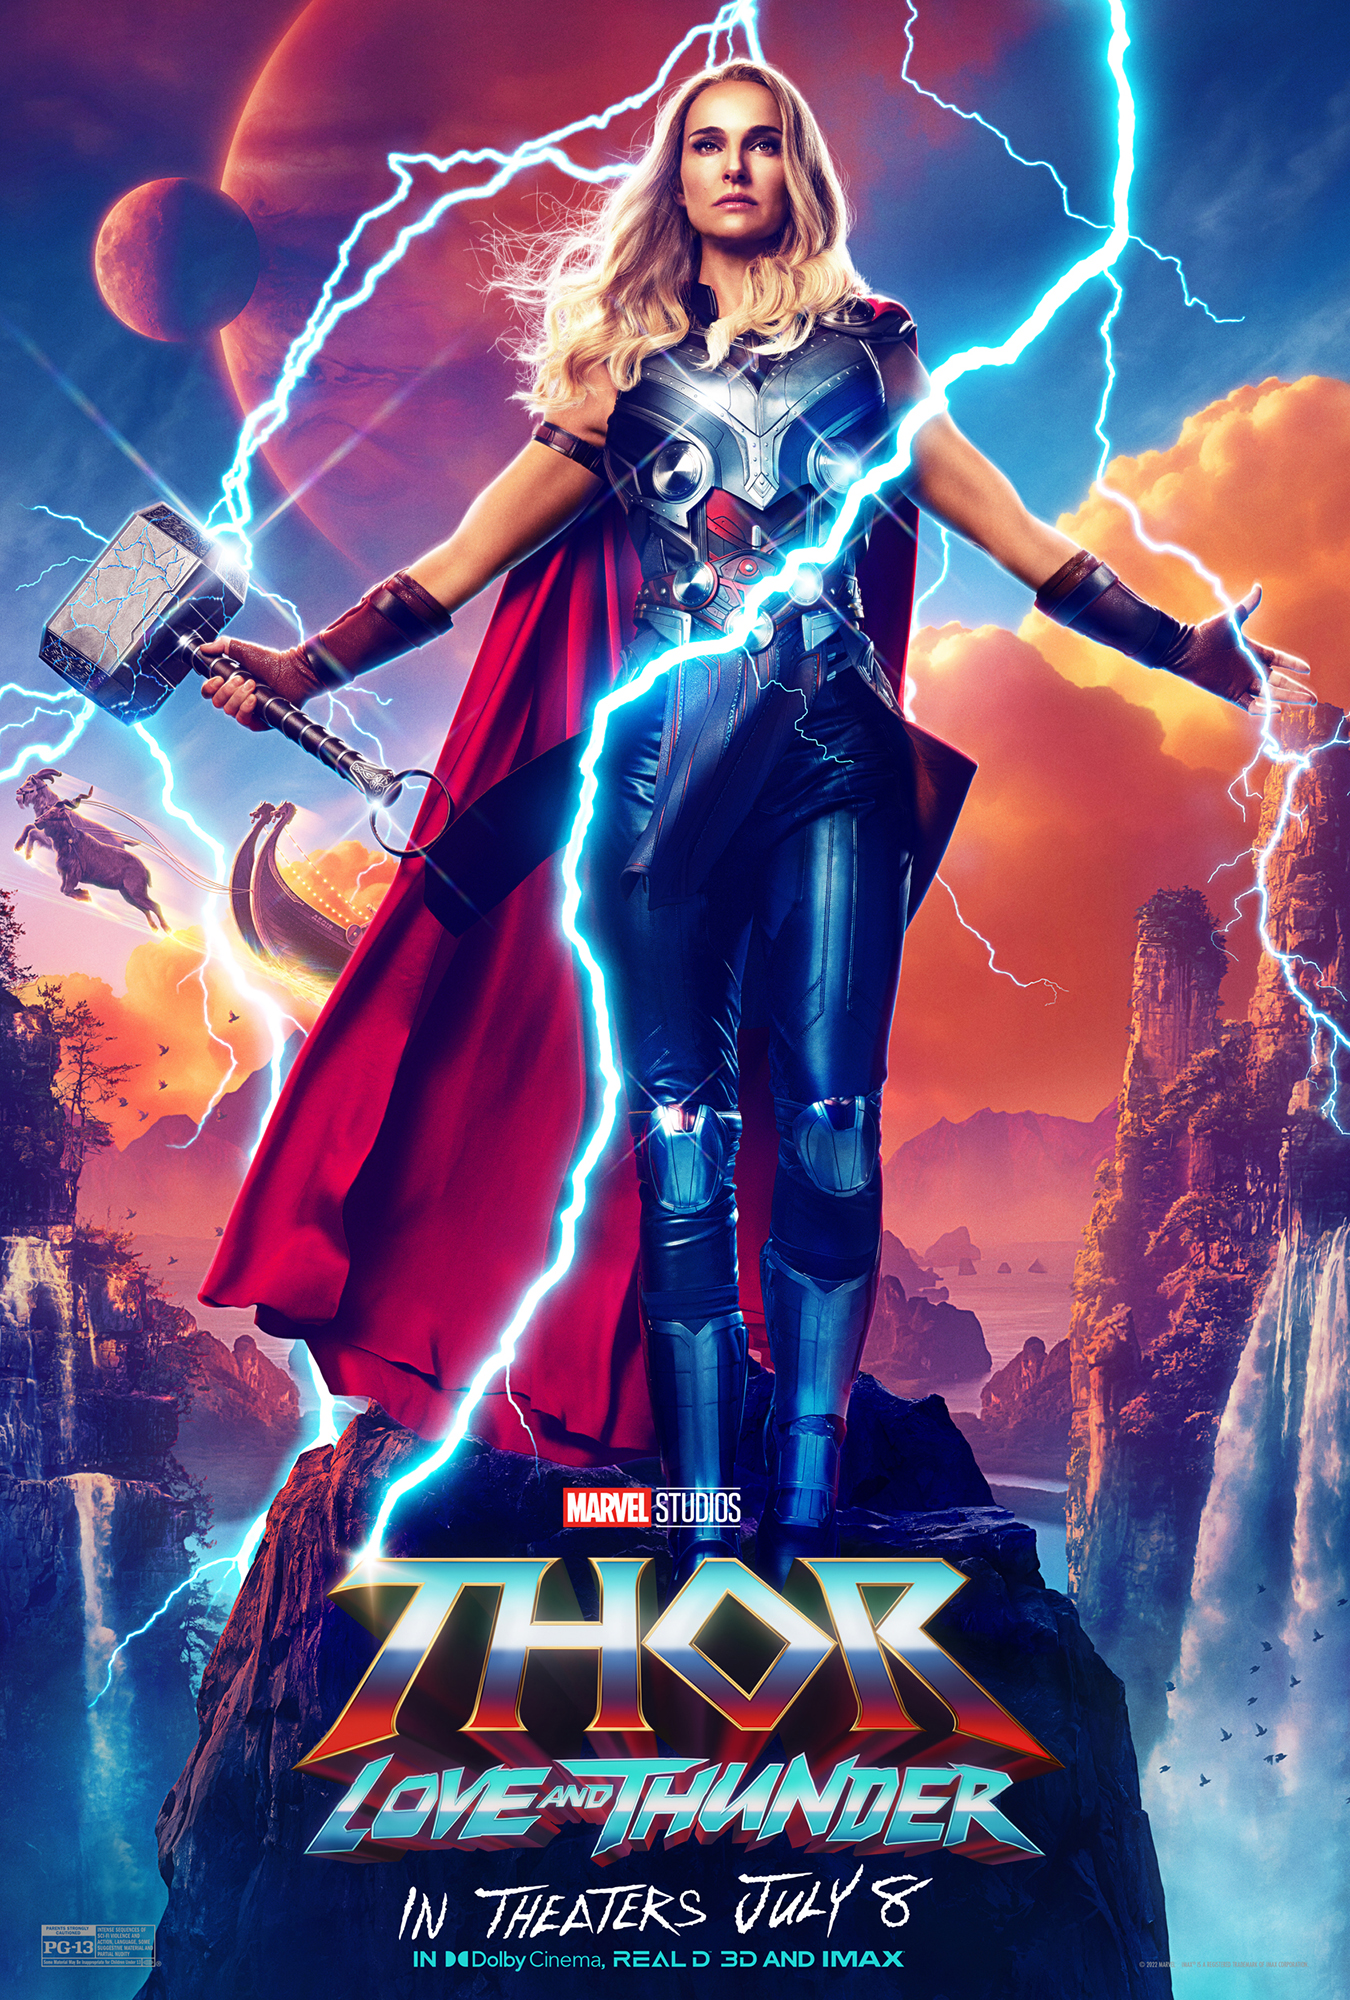 Does Natalie Portman have CGI arms in 'Thor: Love and Thunder'?